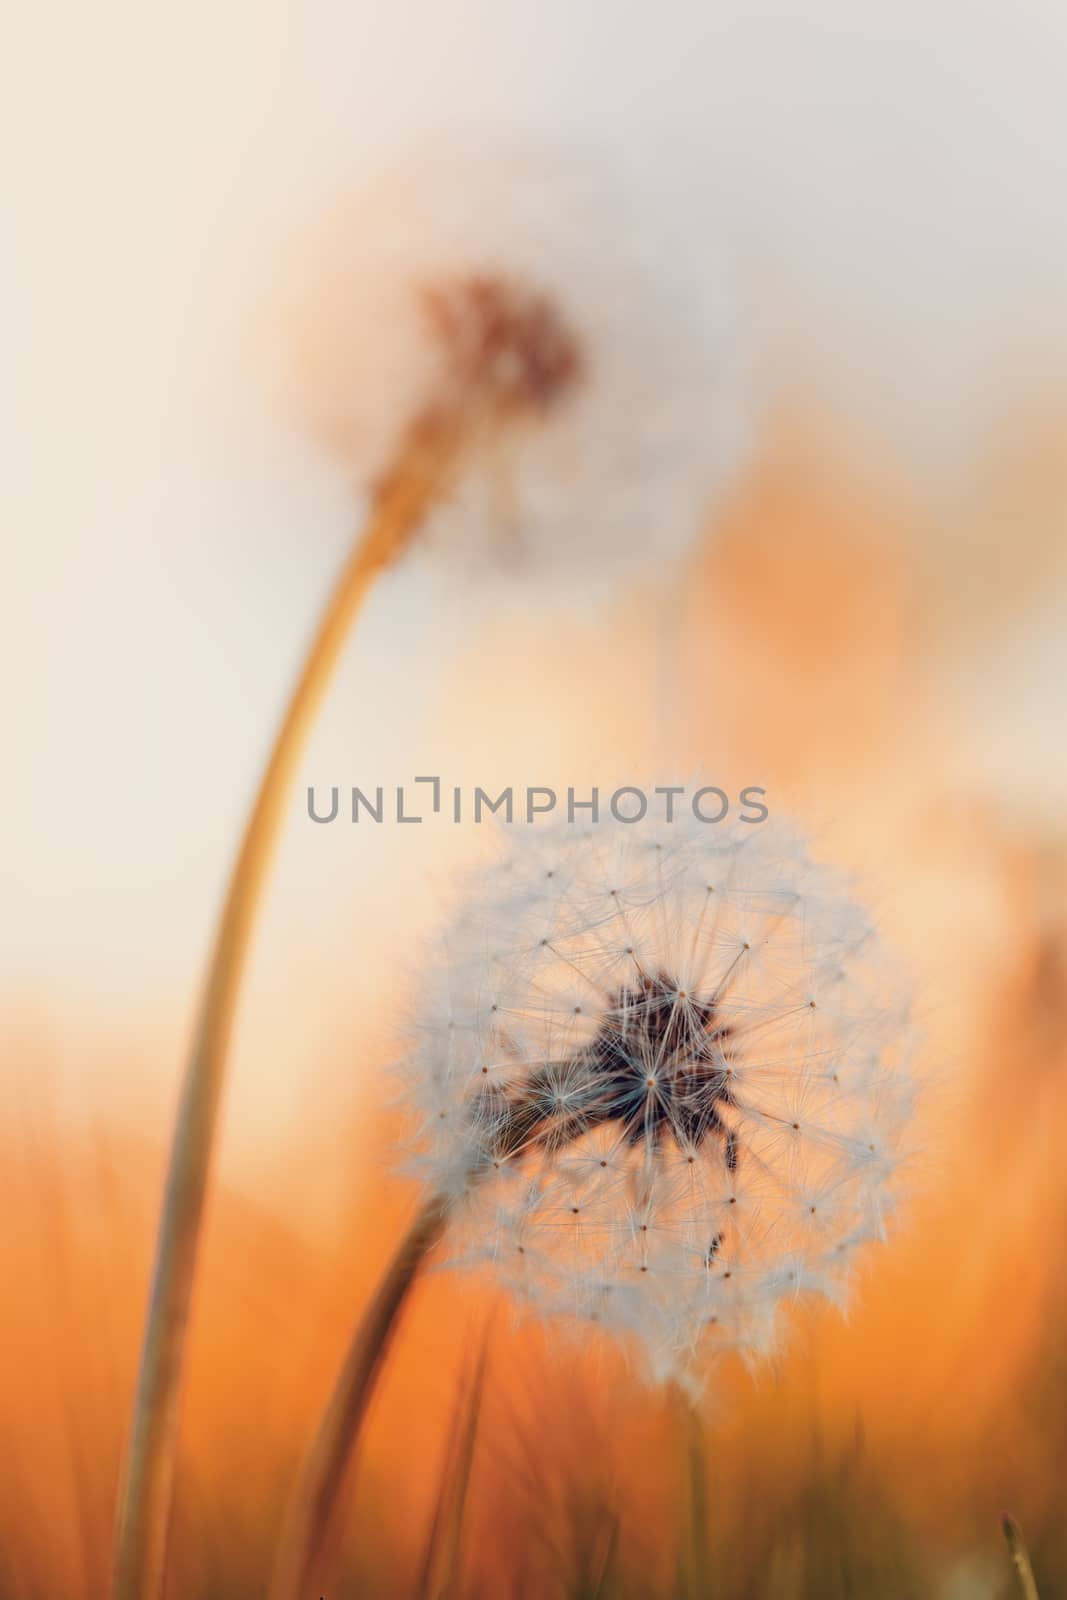 Dandelion flower with shallow focus, abstract spring color tone for natural background. Springtime symbol